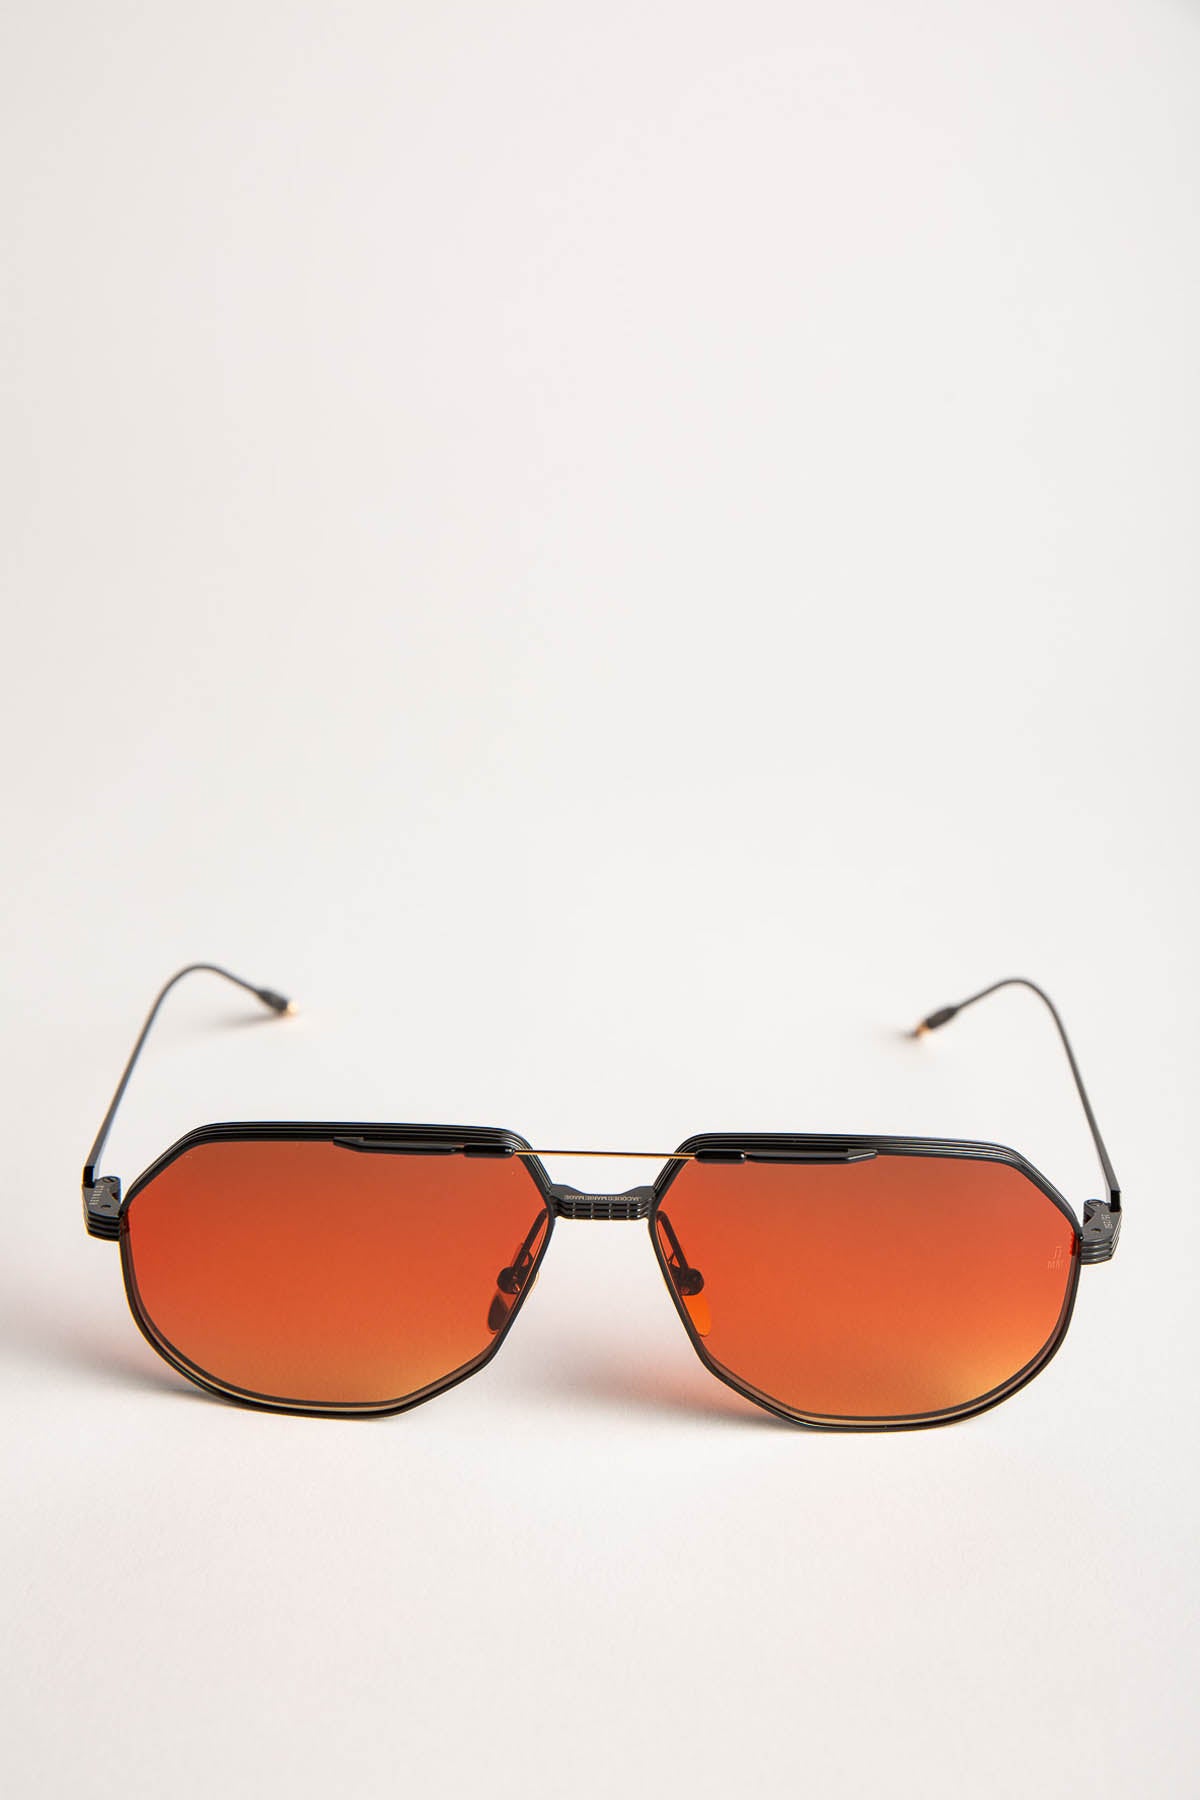 JACQUES MARIE MAGE | REYNOLD SUNGLASSES